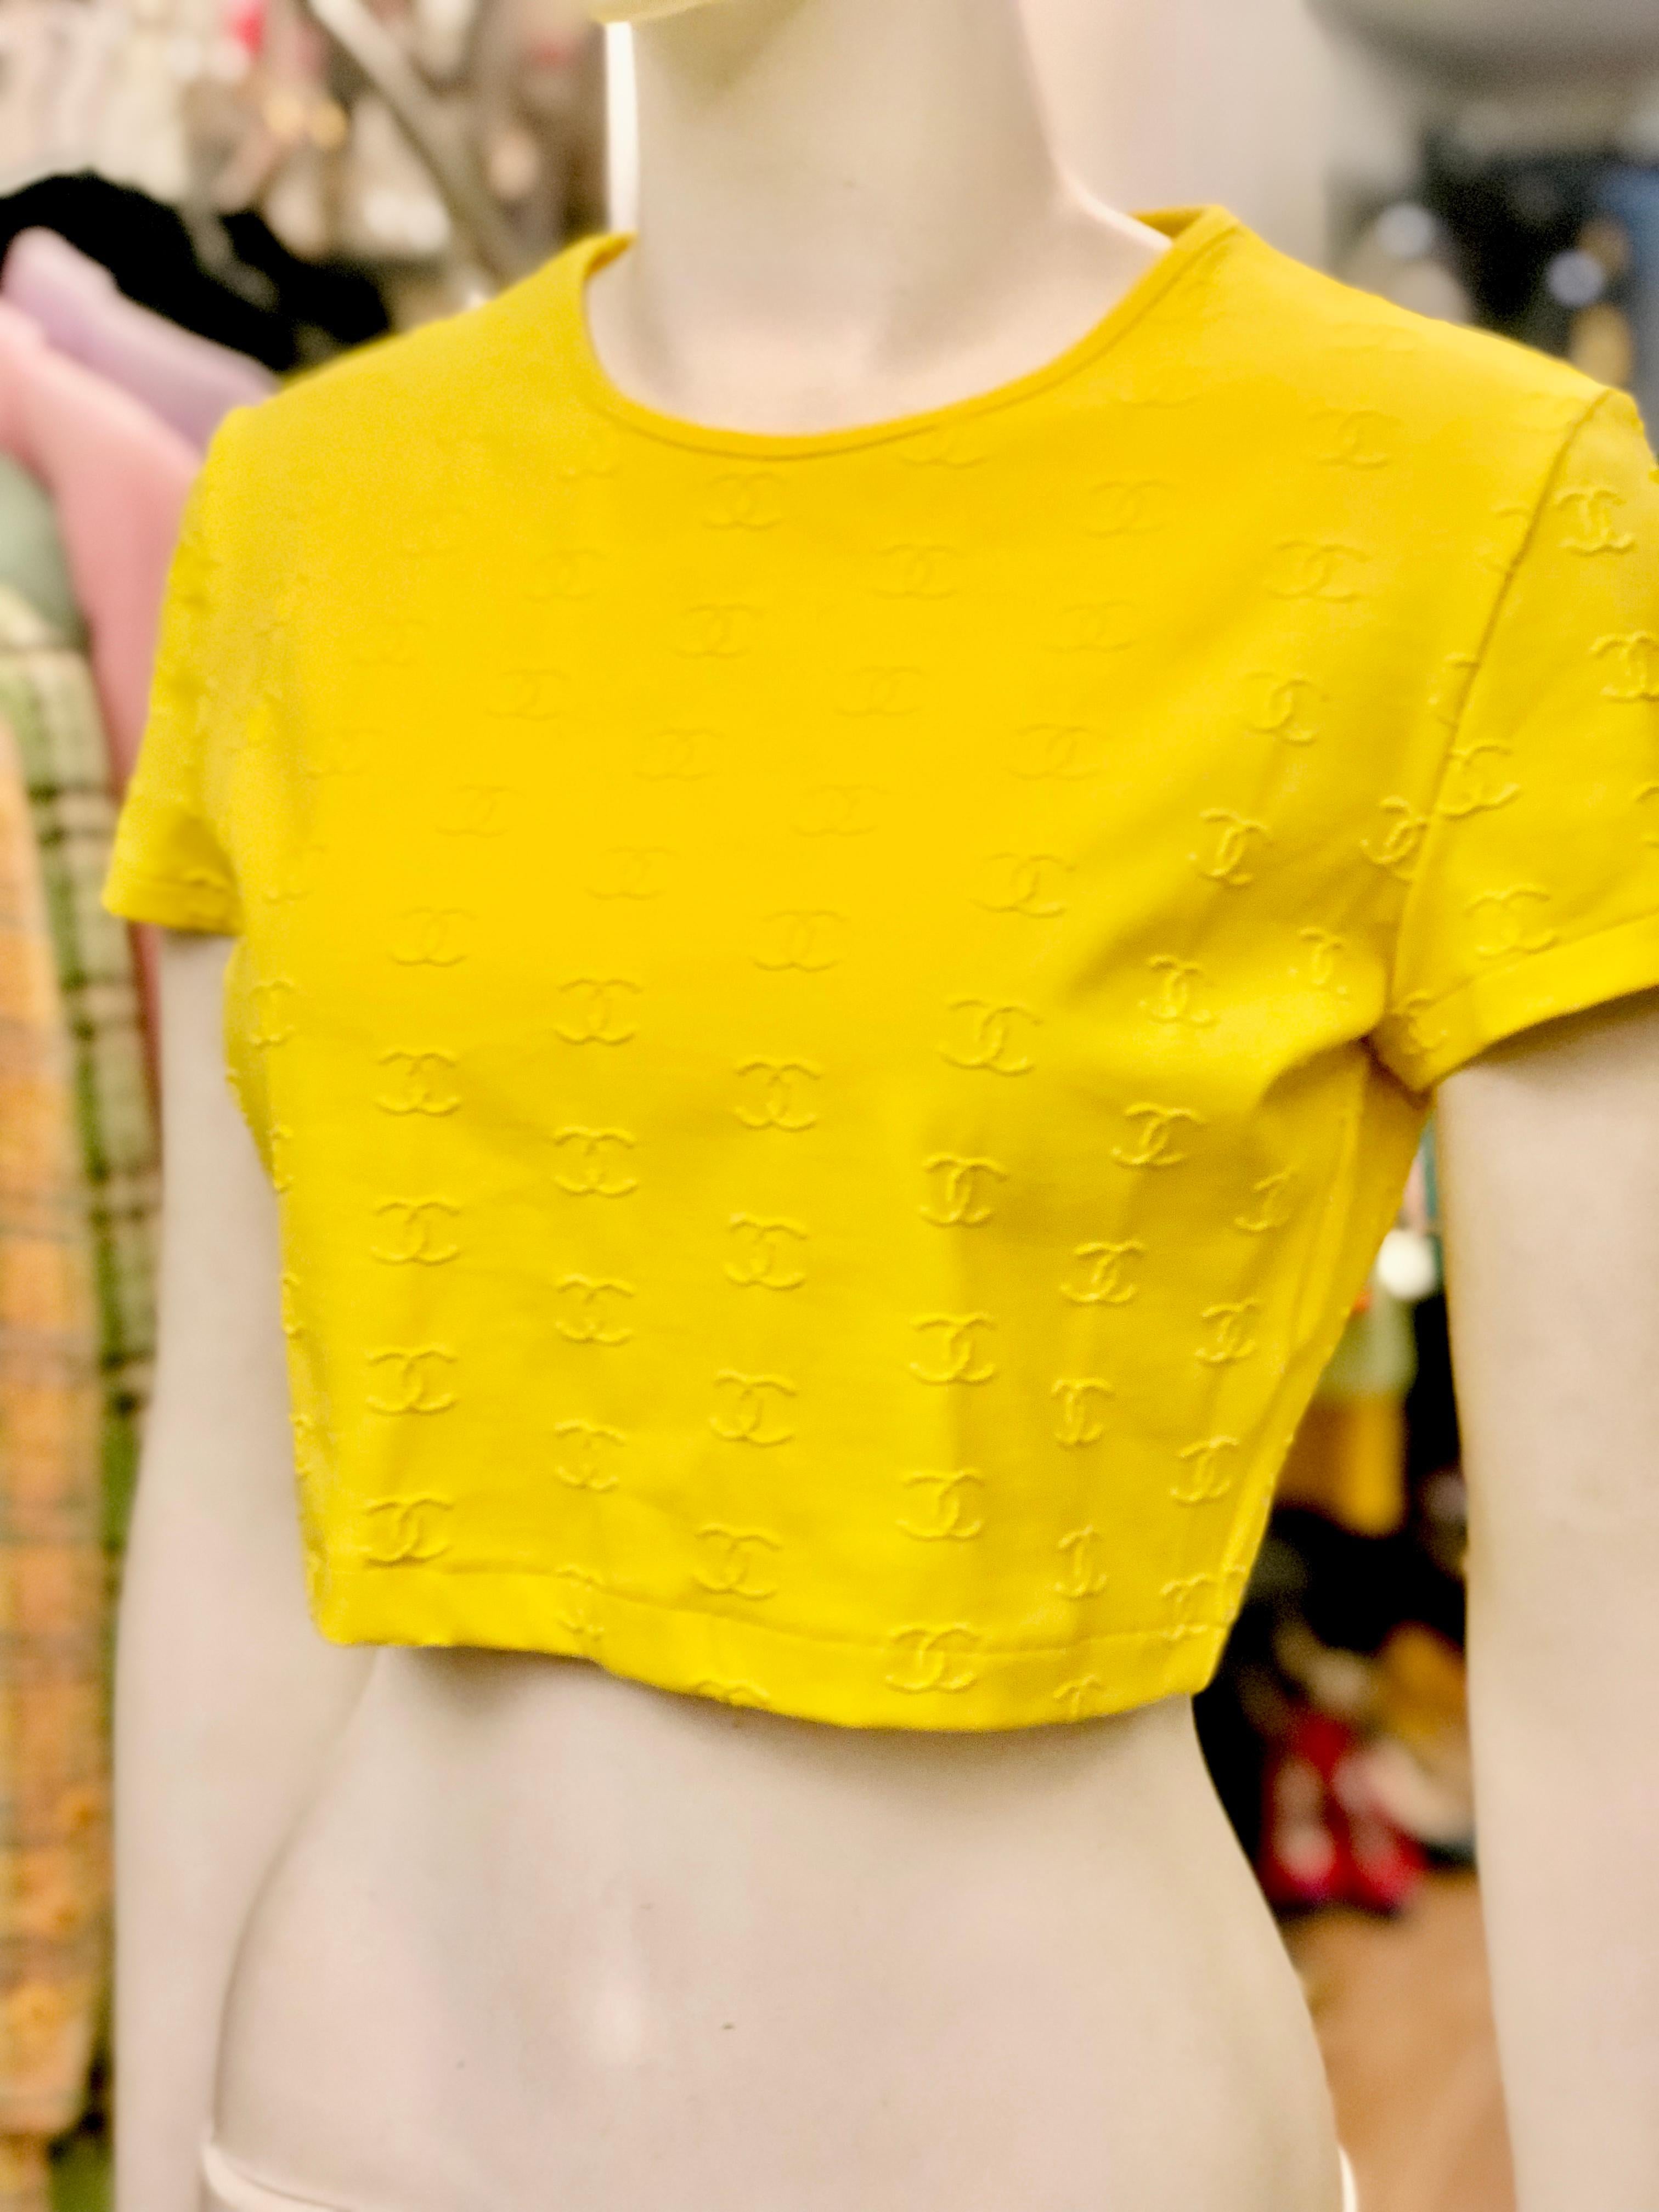 - Vintage 1997 spring Chanel yellow “CC” cropped top. 

- Size 44. (It fits smaller since it stretches.) 

-90.1% Nylon. 9.9% Spandex. 

